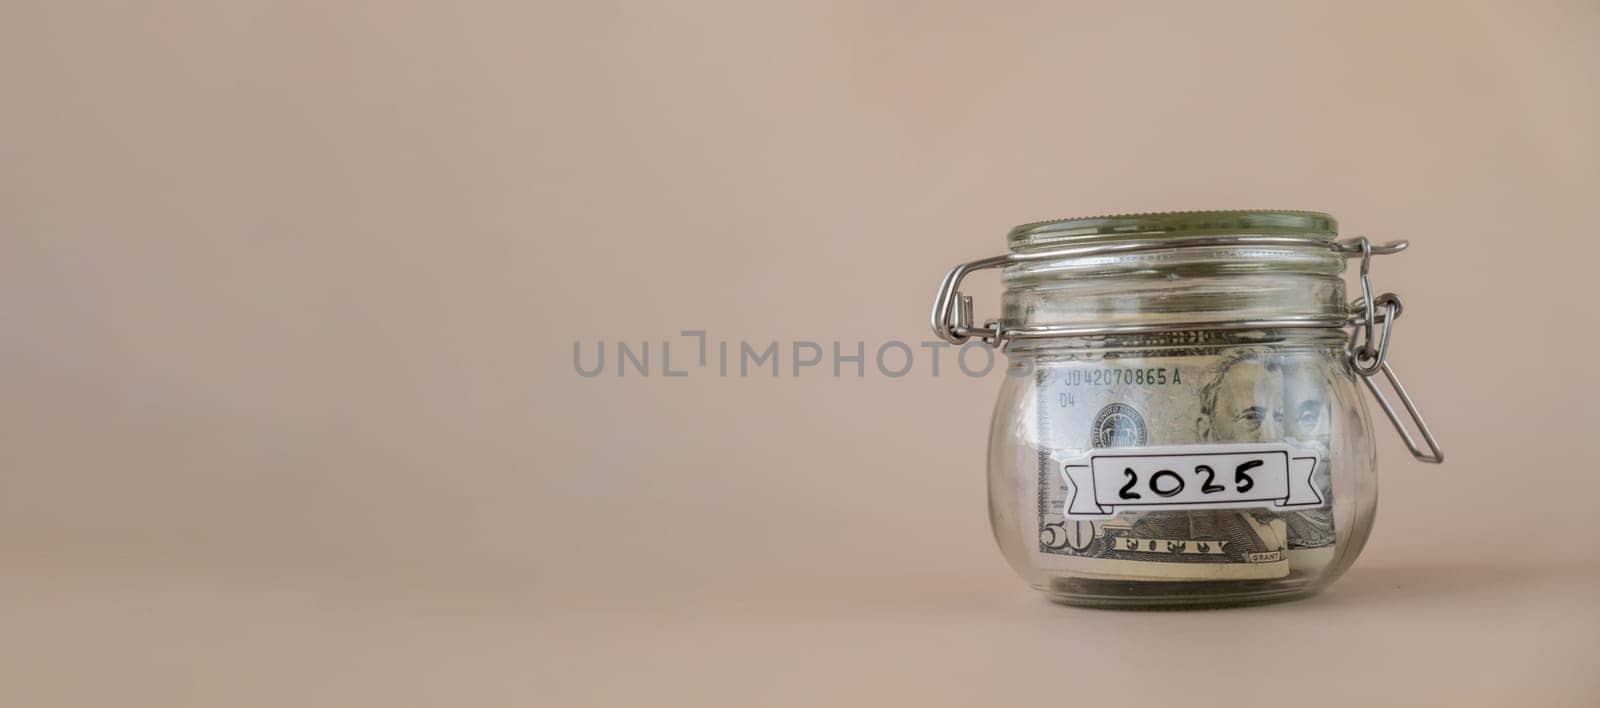 Saving Money In Glass Jar filled with Dollars banknotes. 2025 year transcription in front of jar. Managing personal finances extra income for future insecurity by anna_stasiia